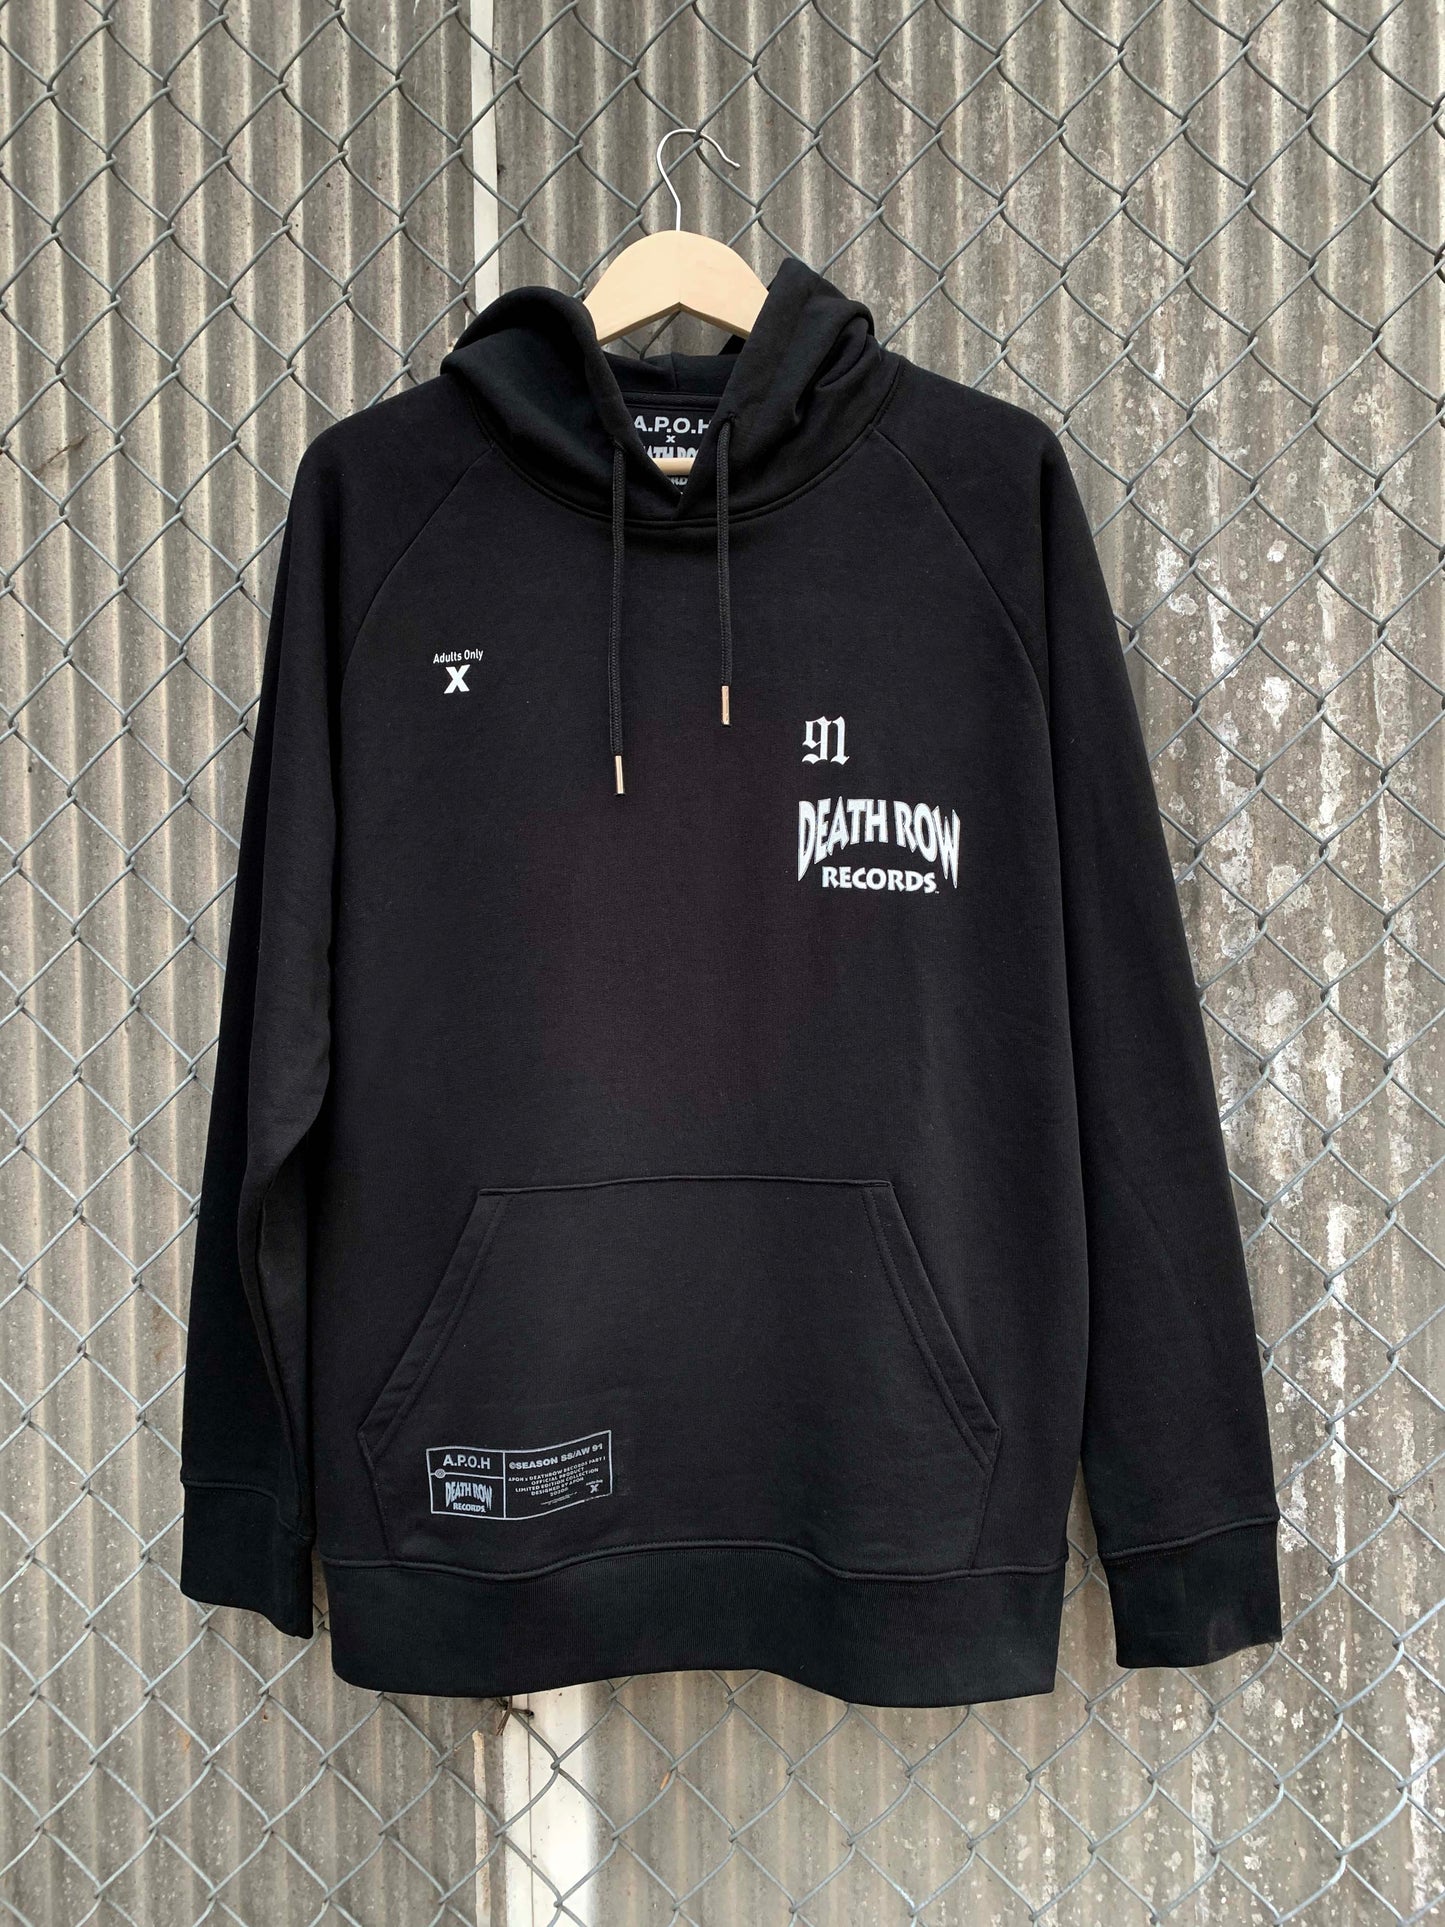 APOH X Death Row Records / 1991 Sustainable Hoodie